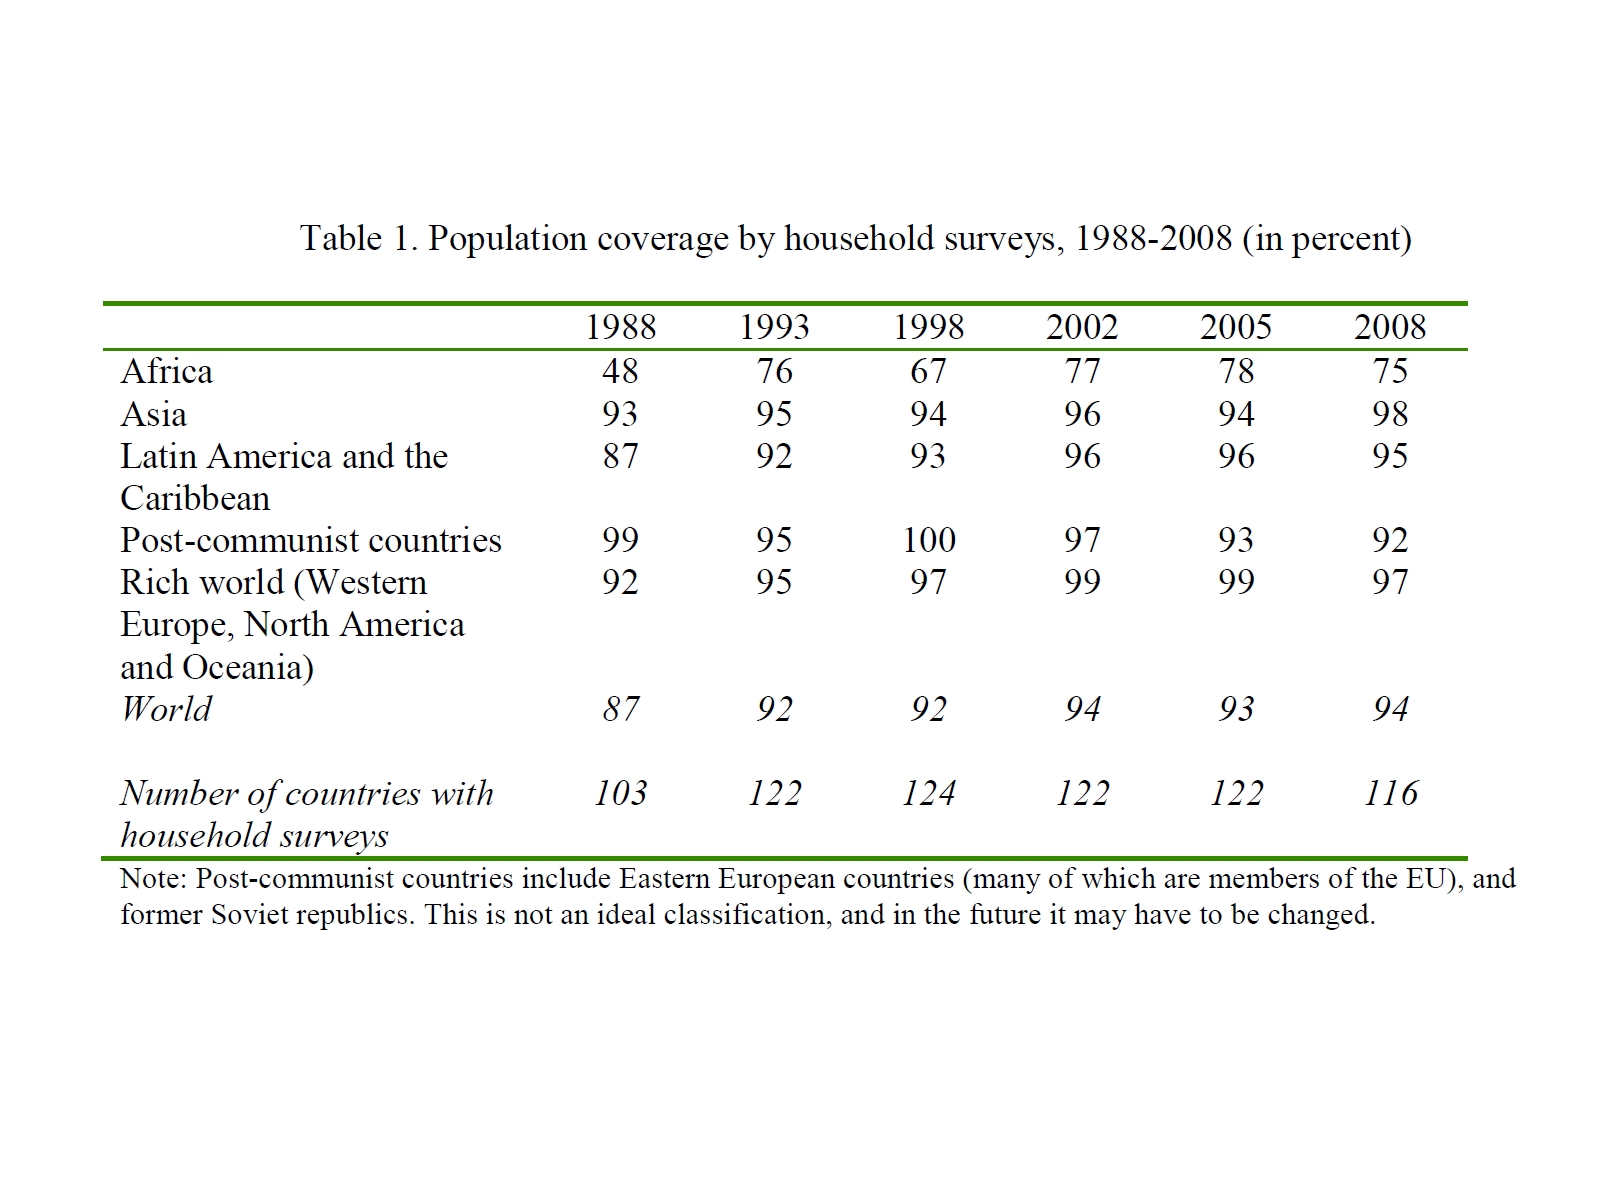 Enlarged view: Table 1. Population Coverage by Household Surveys, 1998-2008 (in percent)